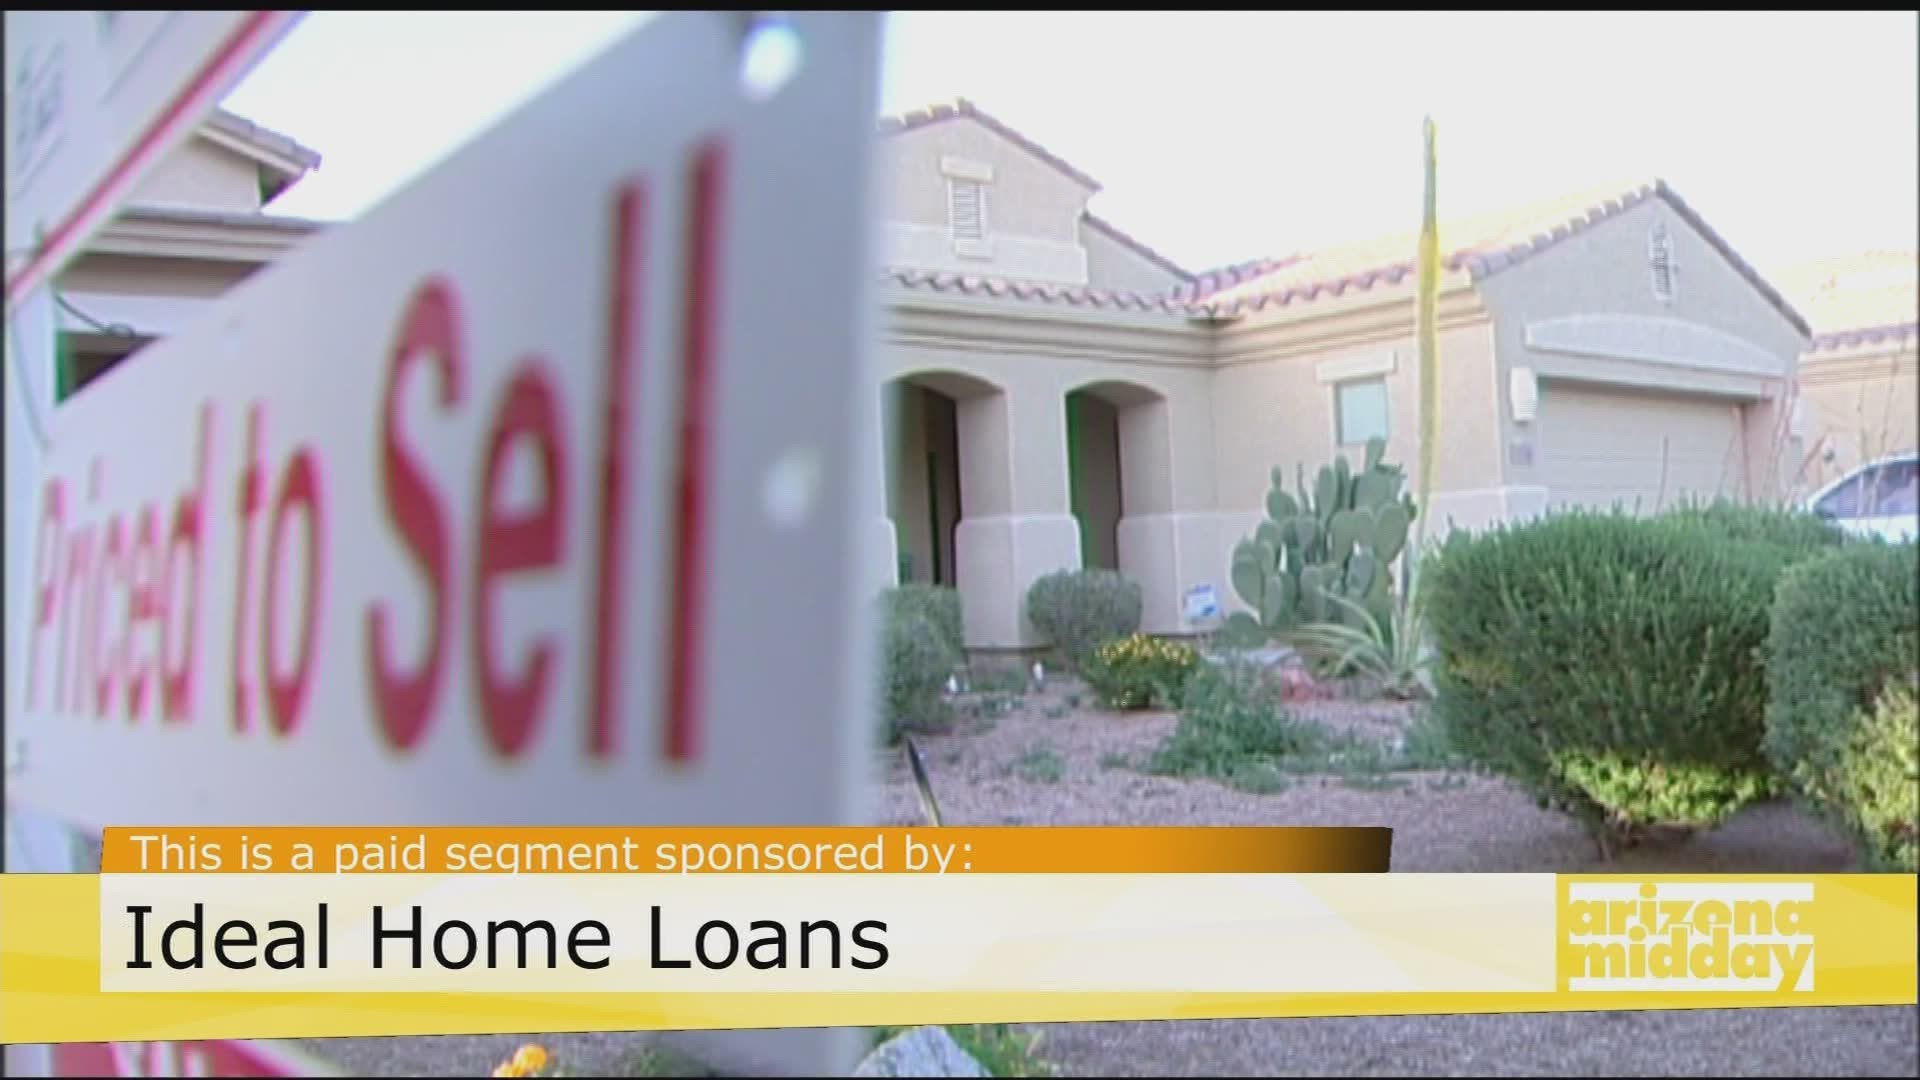 Brent Ivinson, Owner of Ideal Home Loans, gives us an update on the market and tips on buying and refinancing